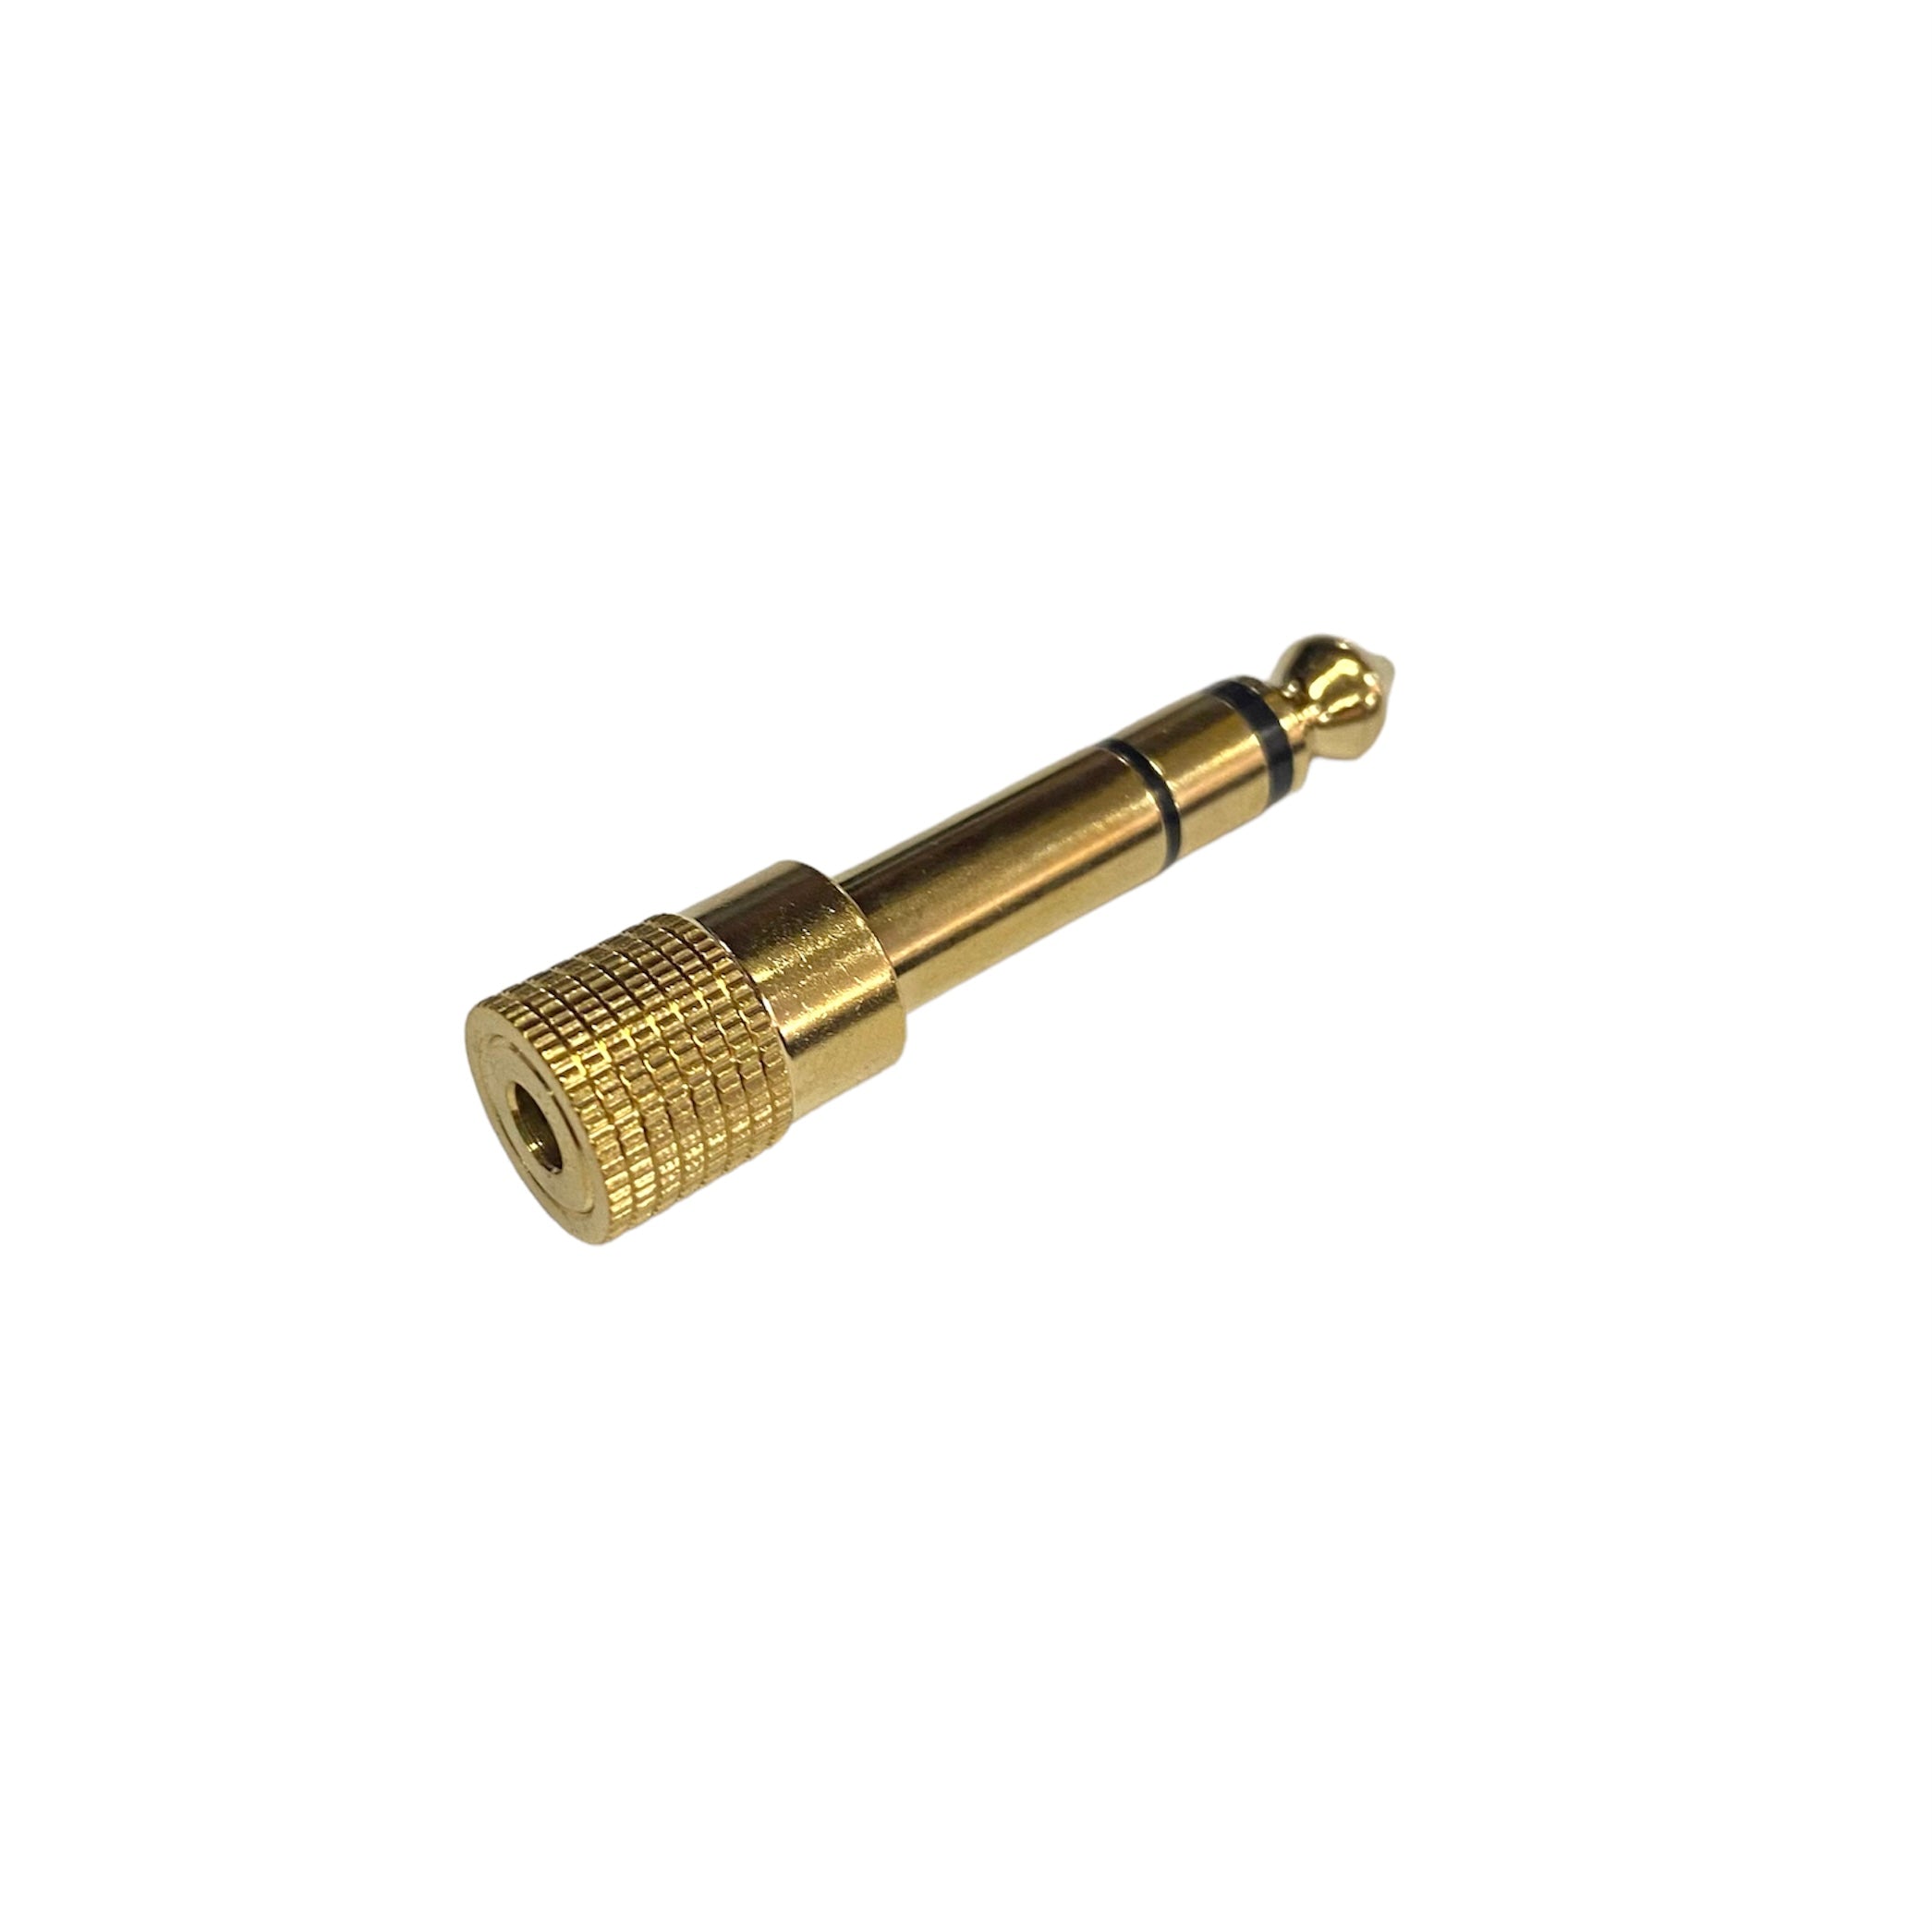 Adaptor - Stereo 3.5mm Female to 6.3mm Male - Gold